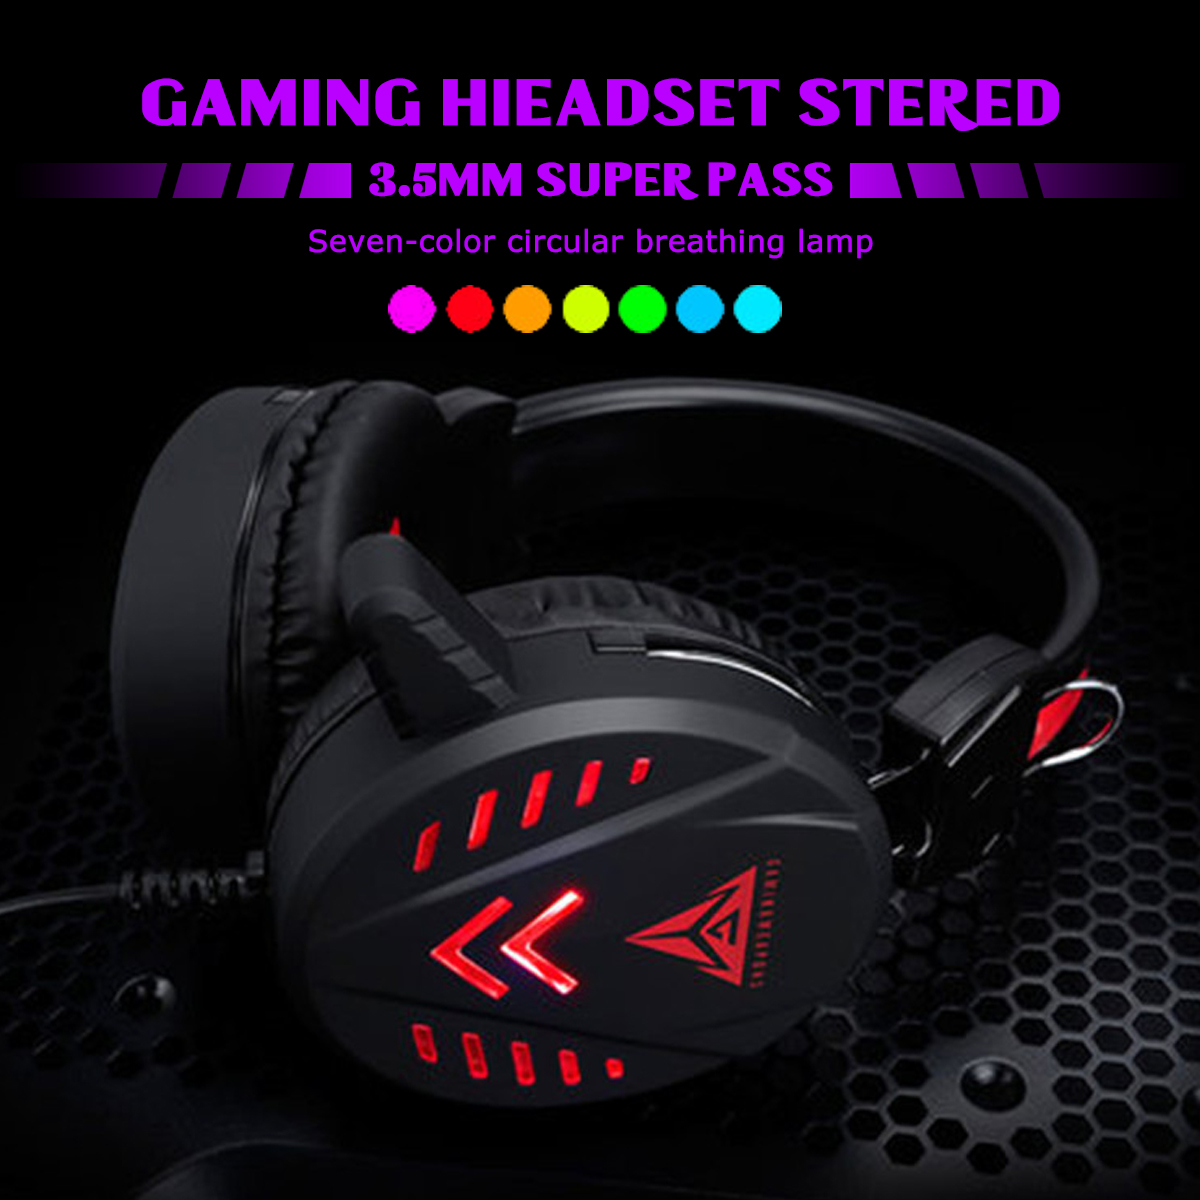 Bakeey-35mm-Super-Pass-Gaming-Headset-Stereo-LED-Colorful-Breathing-Lamp-Earphone-Hifi-Heavy-Bass-Ga-1593352-4